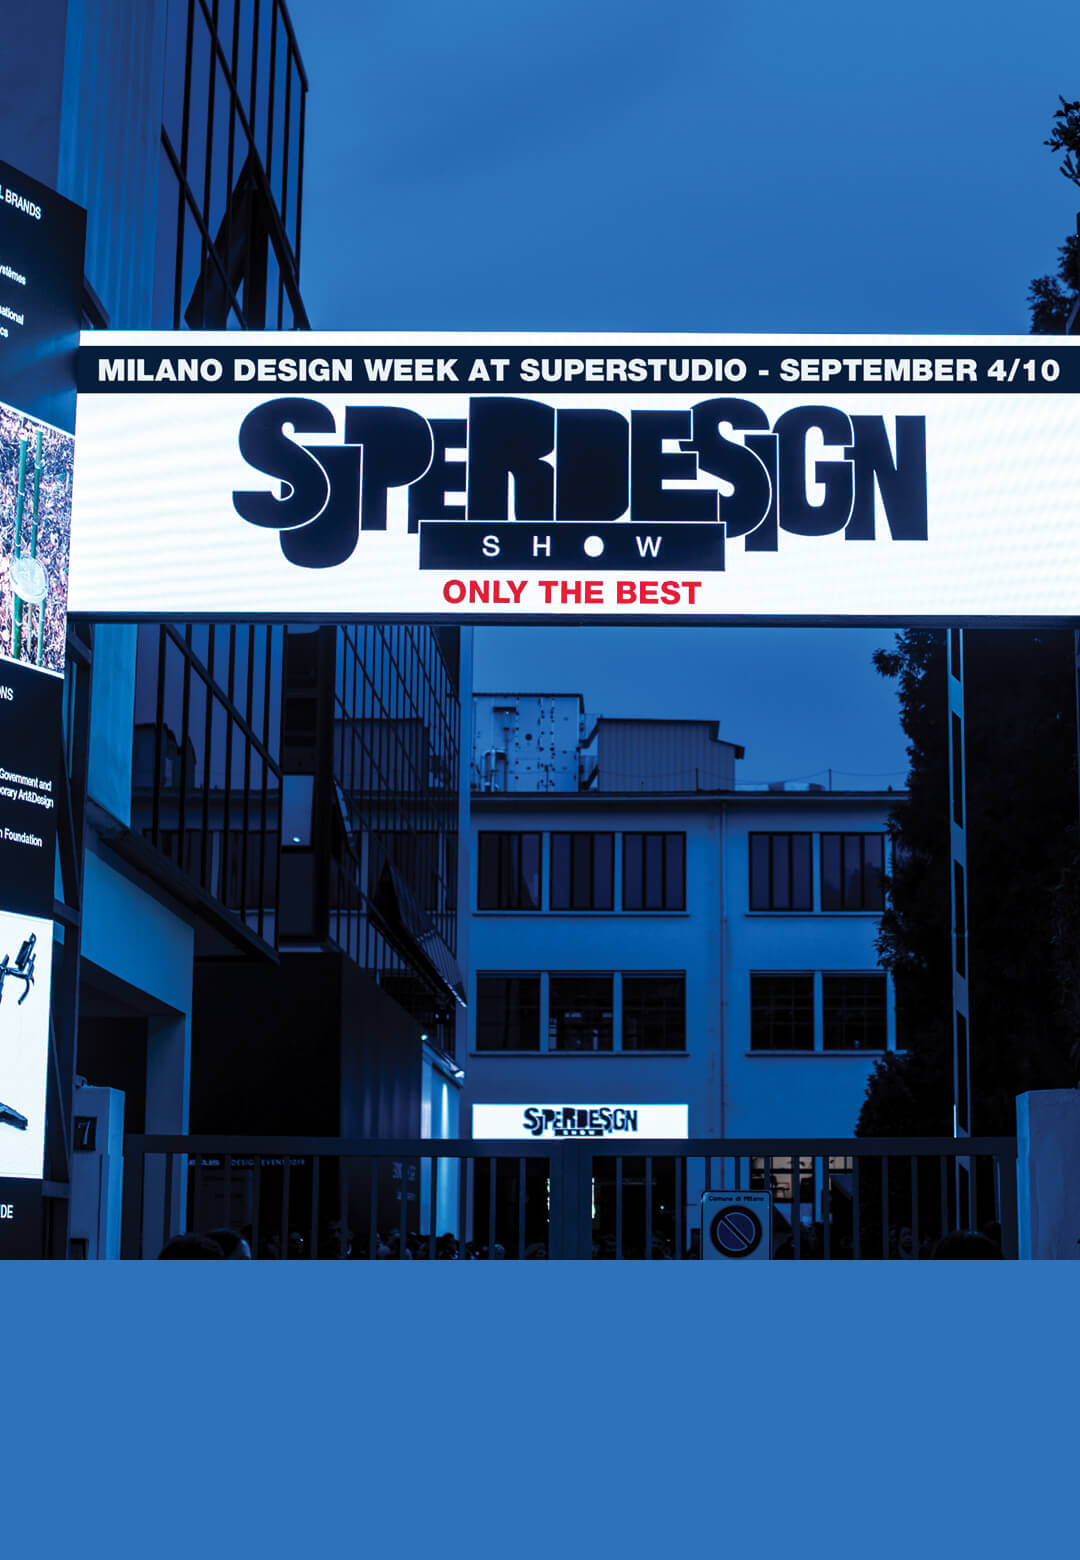 Superdesign Show - Special Edition and Extension By Superstudio for Milan Design Week 2021